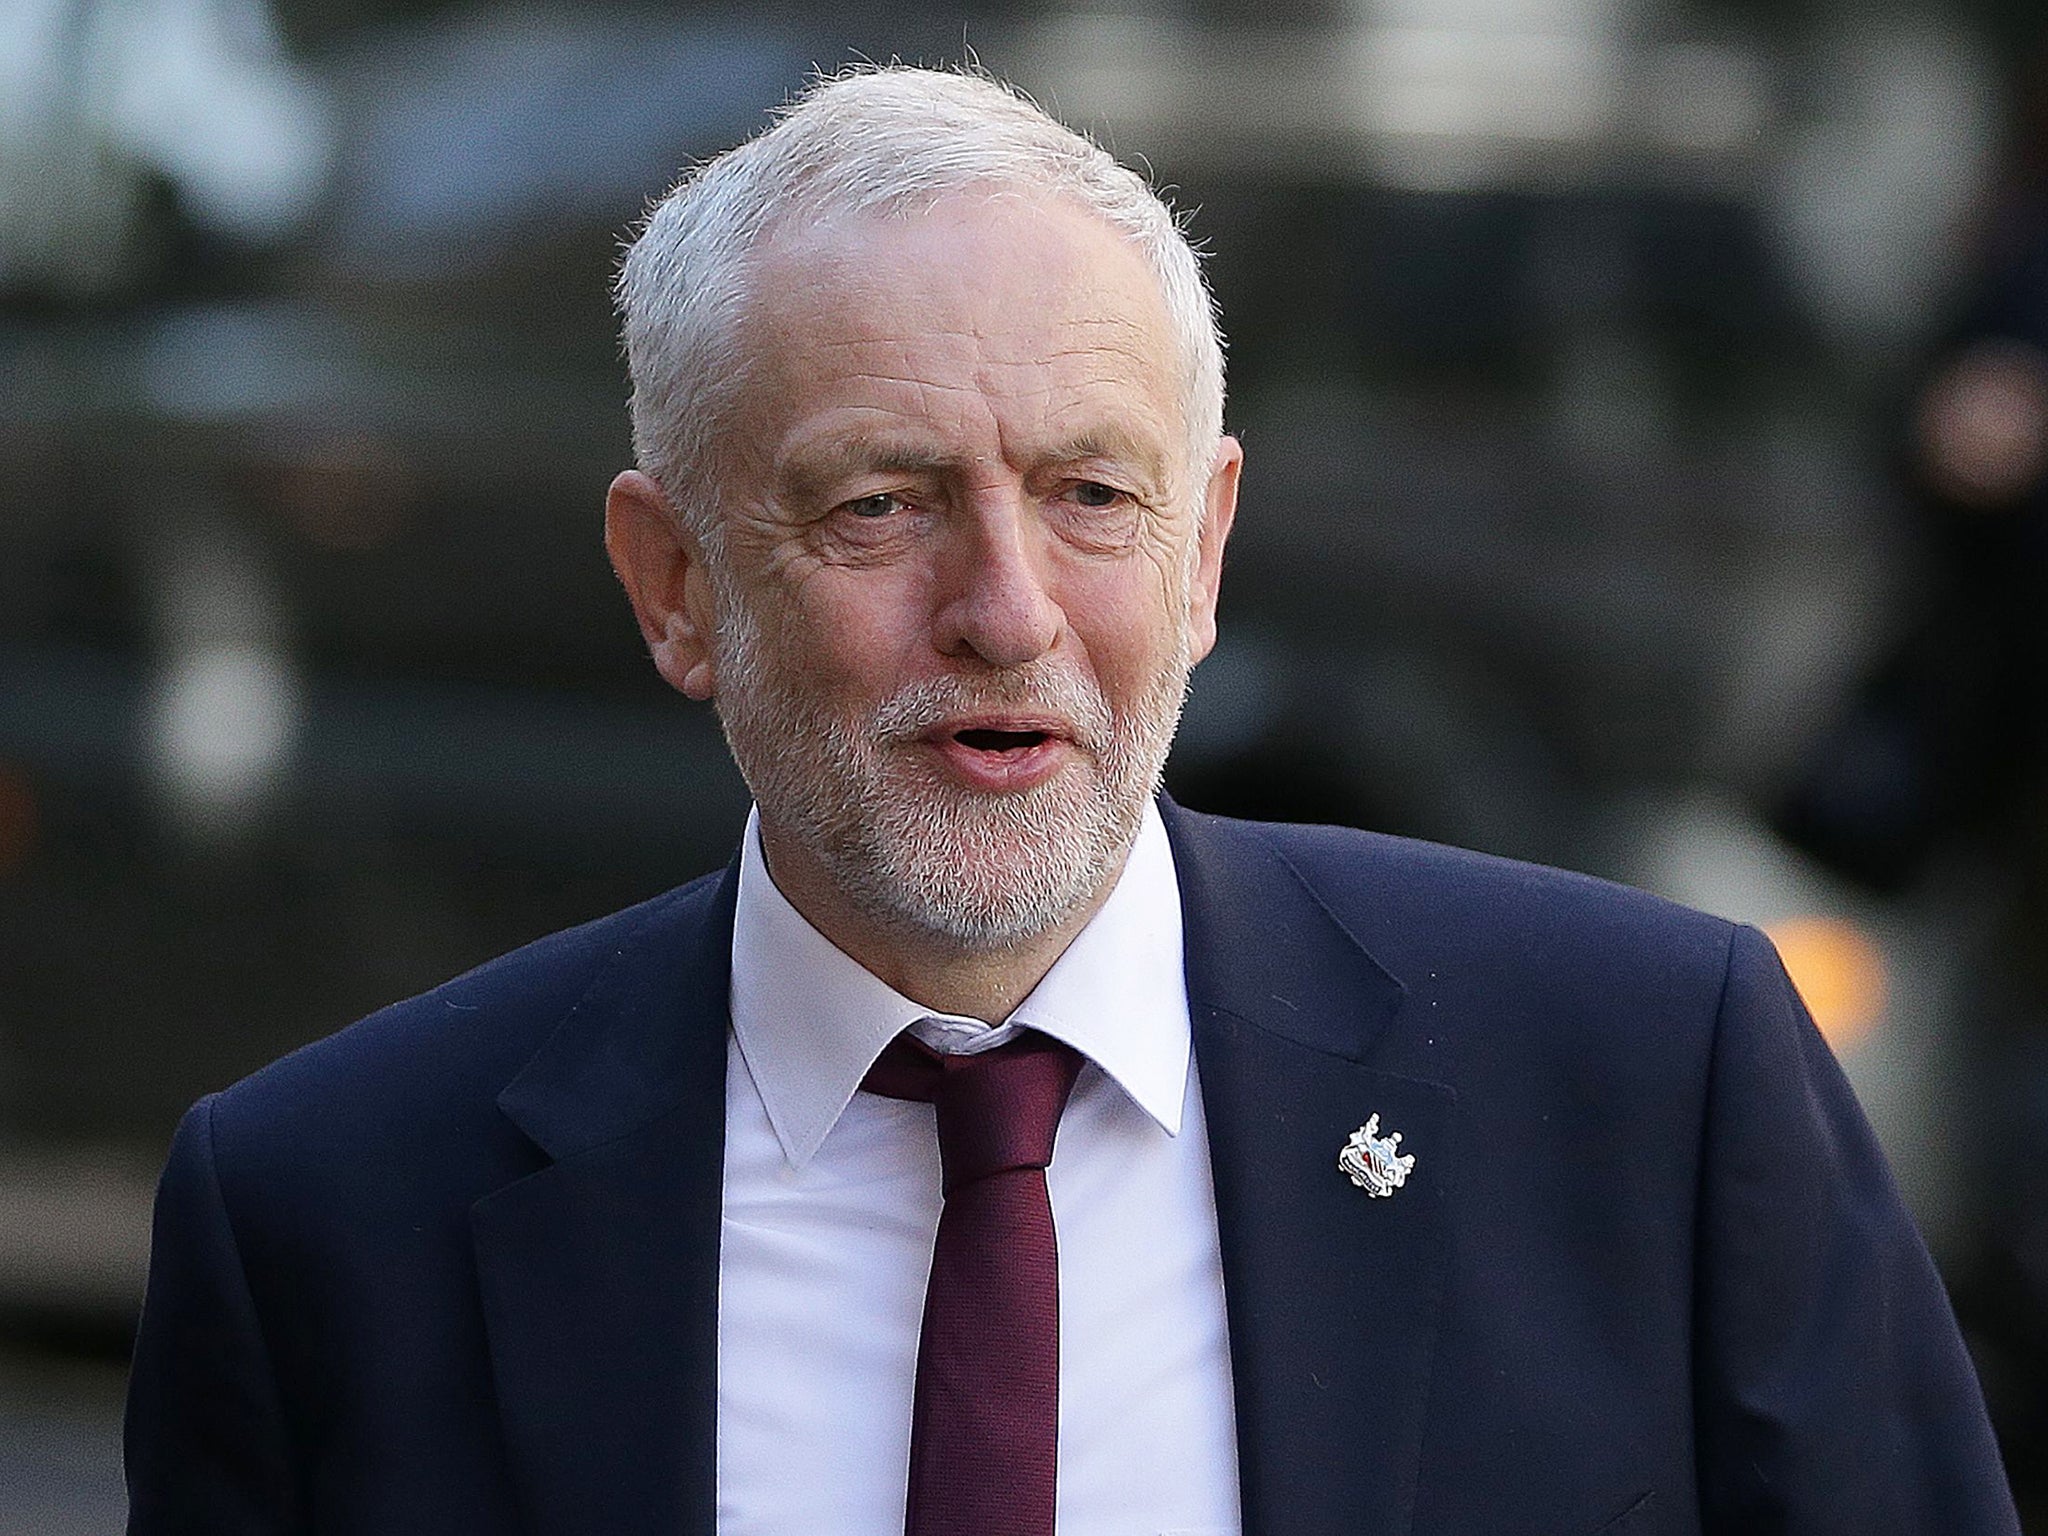 Britain's main opposition Labour party leader Jeremy Corbyn arrives to make a general election campaign speech in central London